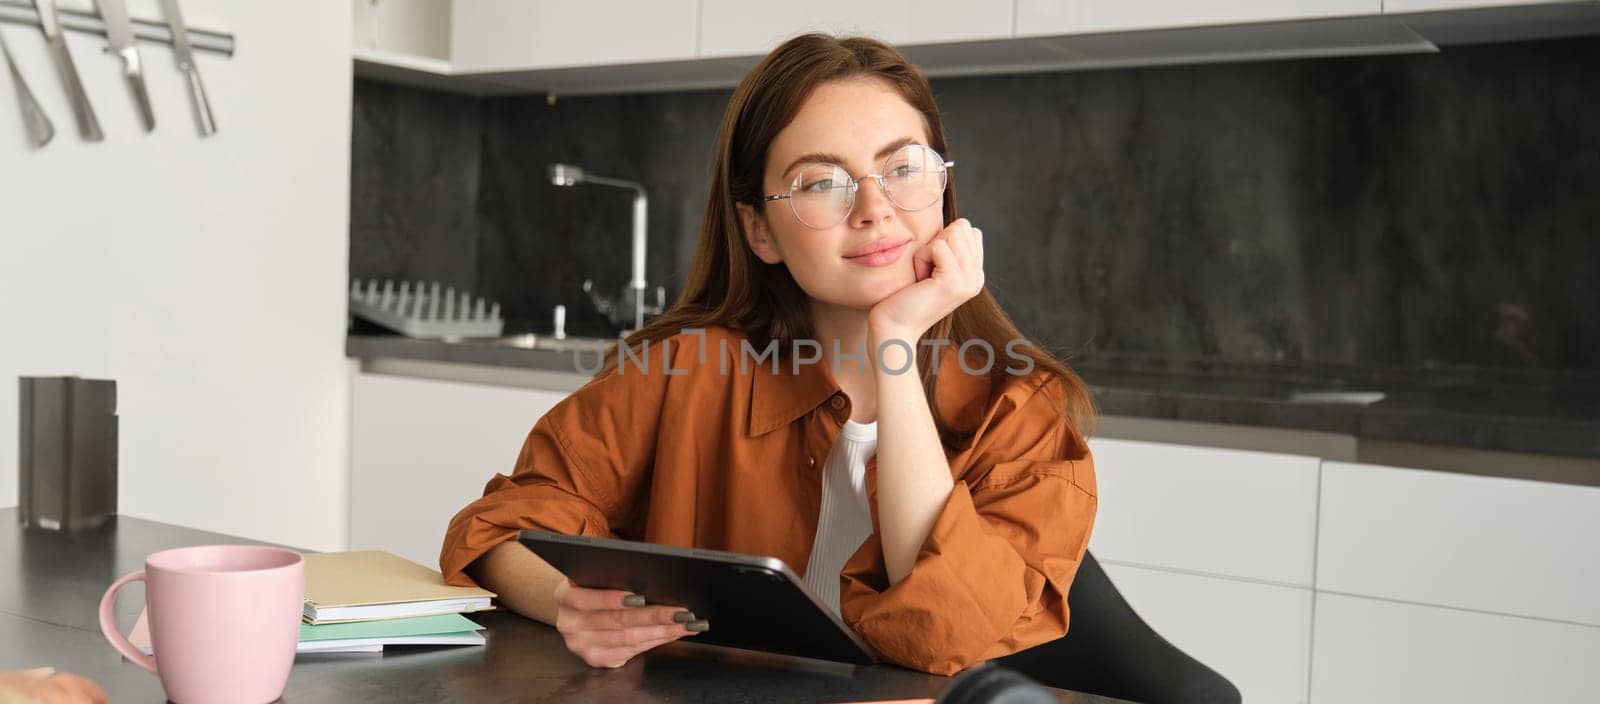 Portrait of young woman working from home, connecting to lesson on digital tablet, reading in glasses, studying remotely in her kitchen, distance learning and education concept.